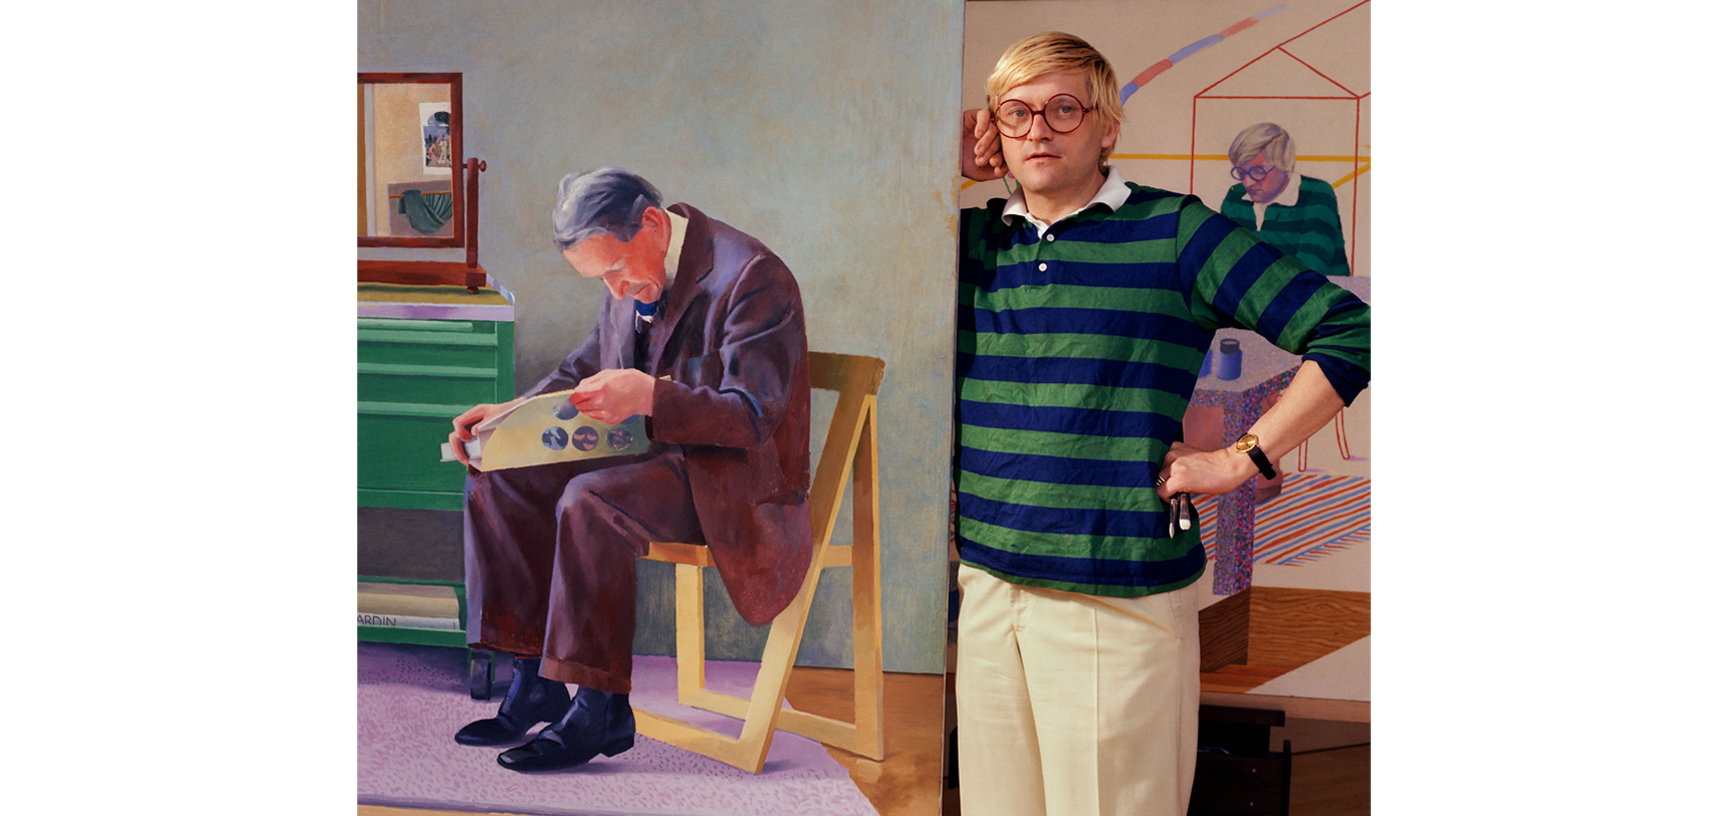 Portrait of David Hockney - a middle aged white man with blonde hair and glasses, wearing a stripey blue and green jumper and cream trousers, standing next to a large painting of an older man reading a newspaper, looking directly at the camera